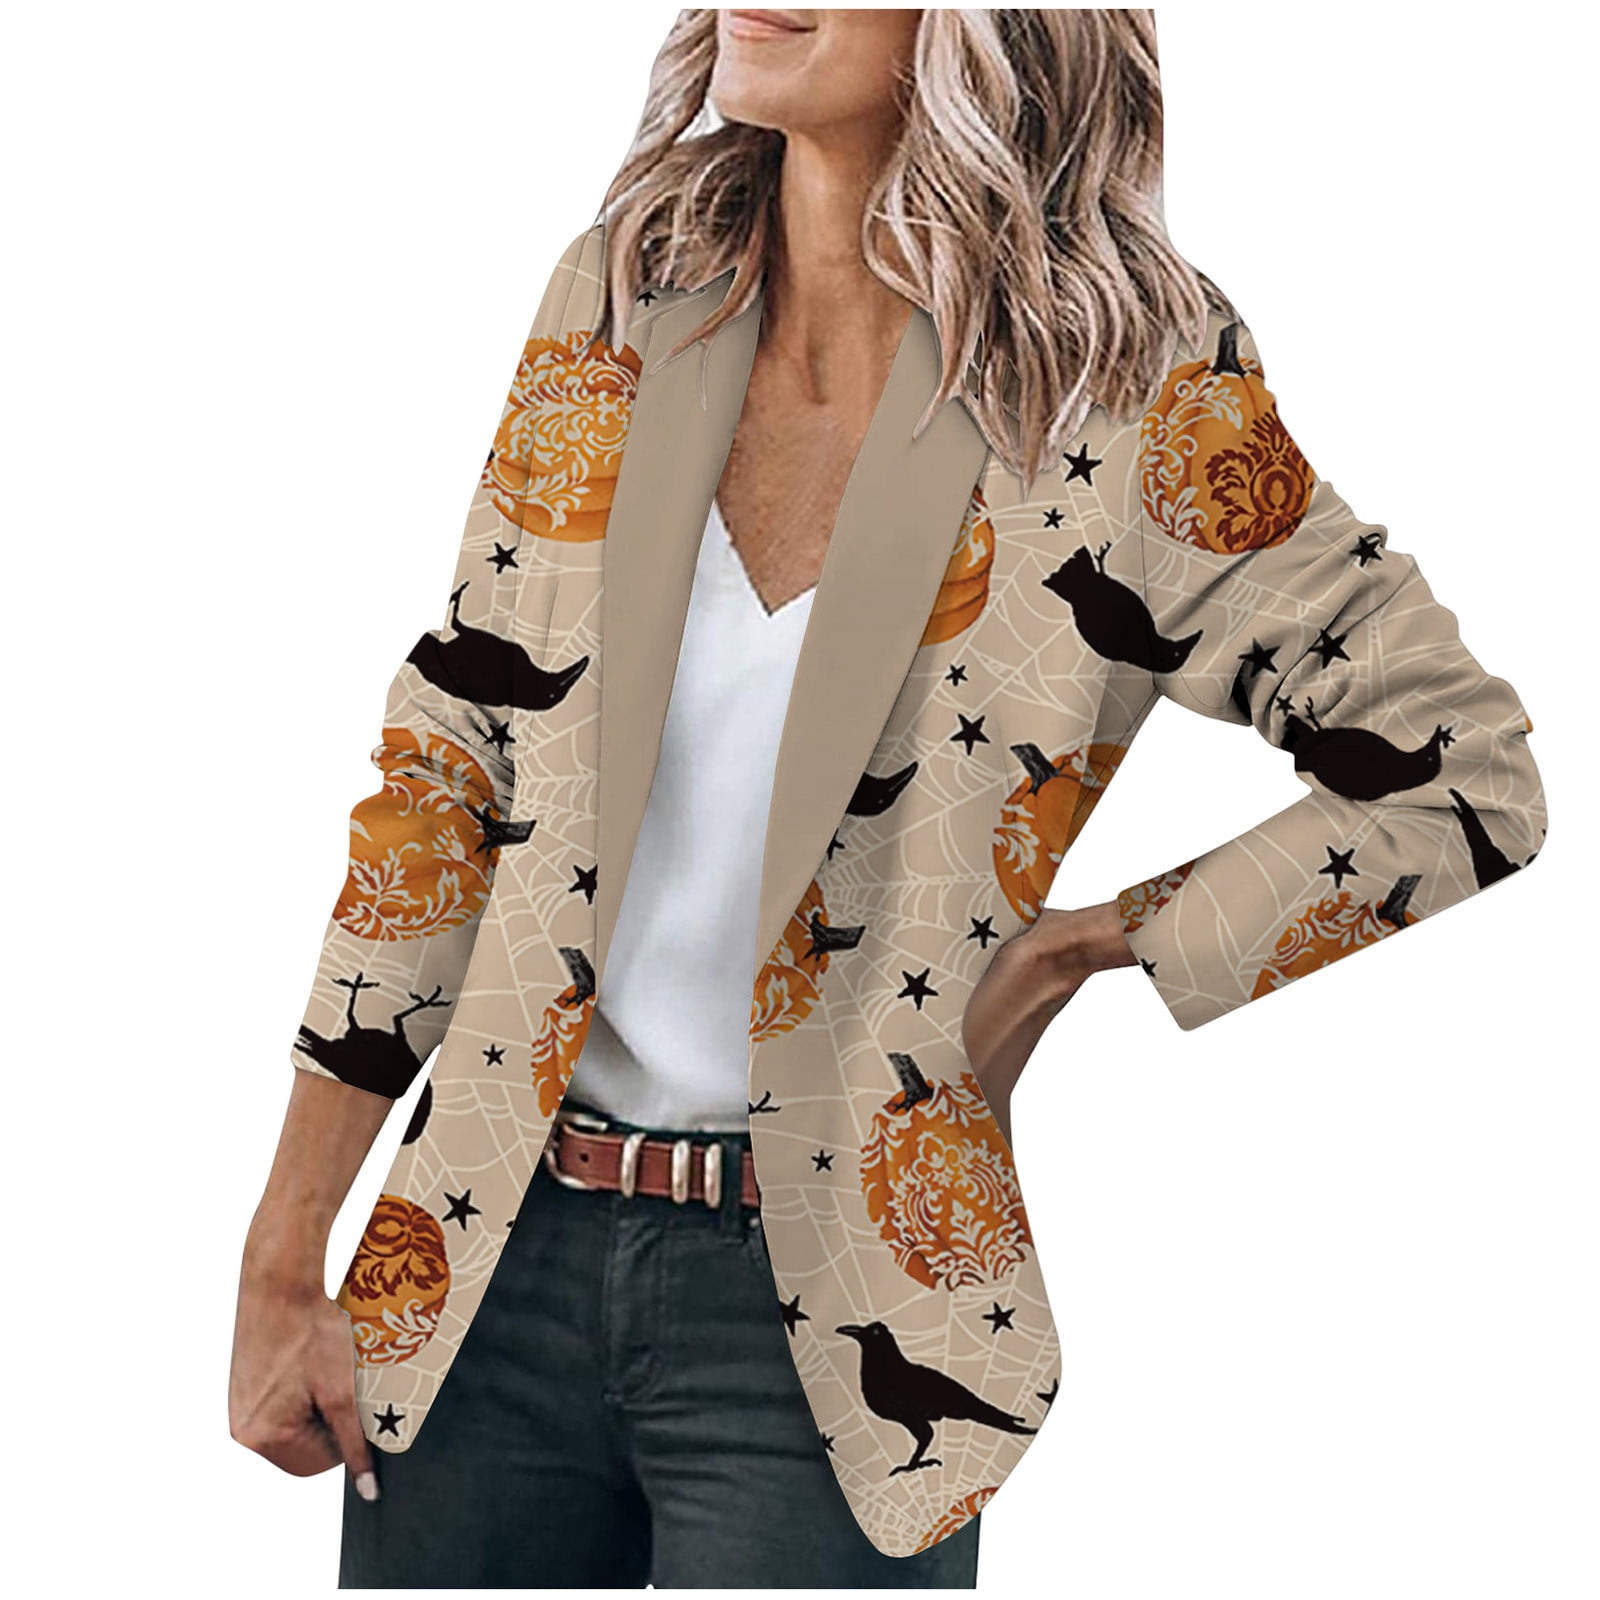 Jackets for Women Casual Women Blazers For Work Casual Long Sleeve Mid-Length Trench Coat Casual Work Suits Outerwears Abrigos de Elegantes Largos - Walmart.com